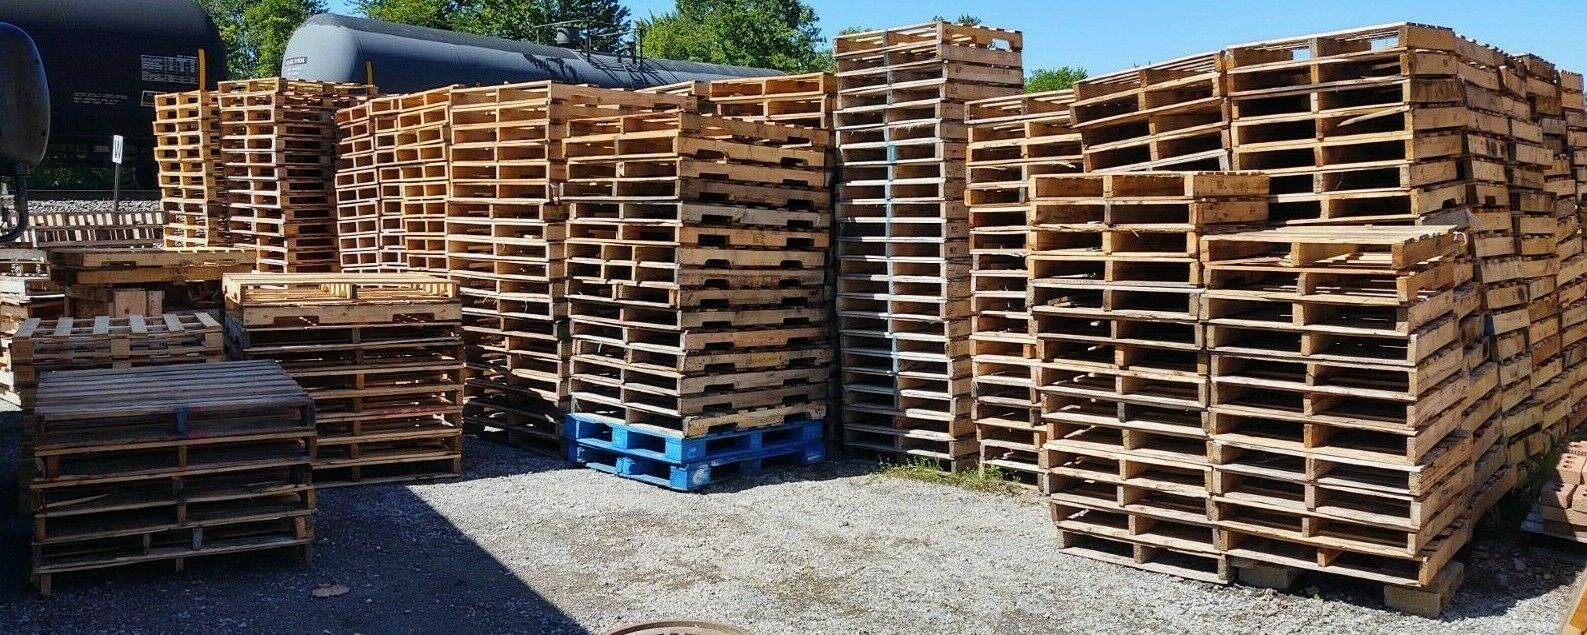 Choose Size Recycled Used Wooden Pallets Local Pickup Butler Indiana Or Freight